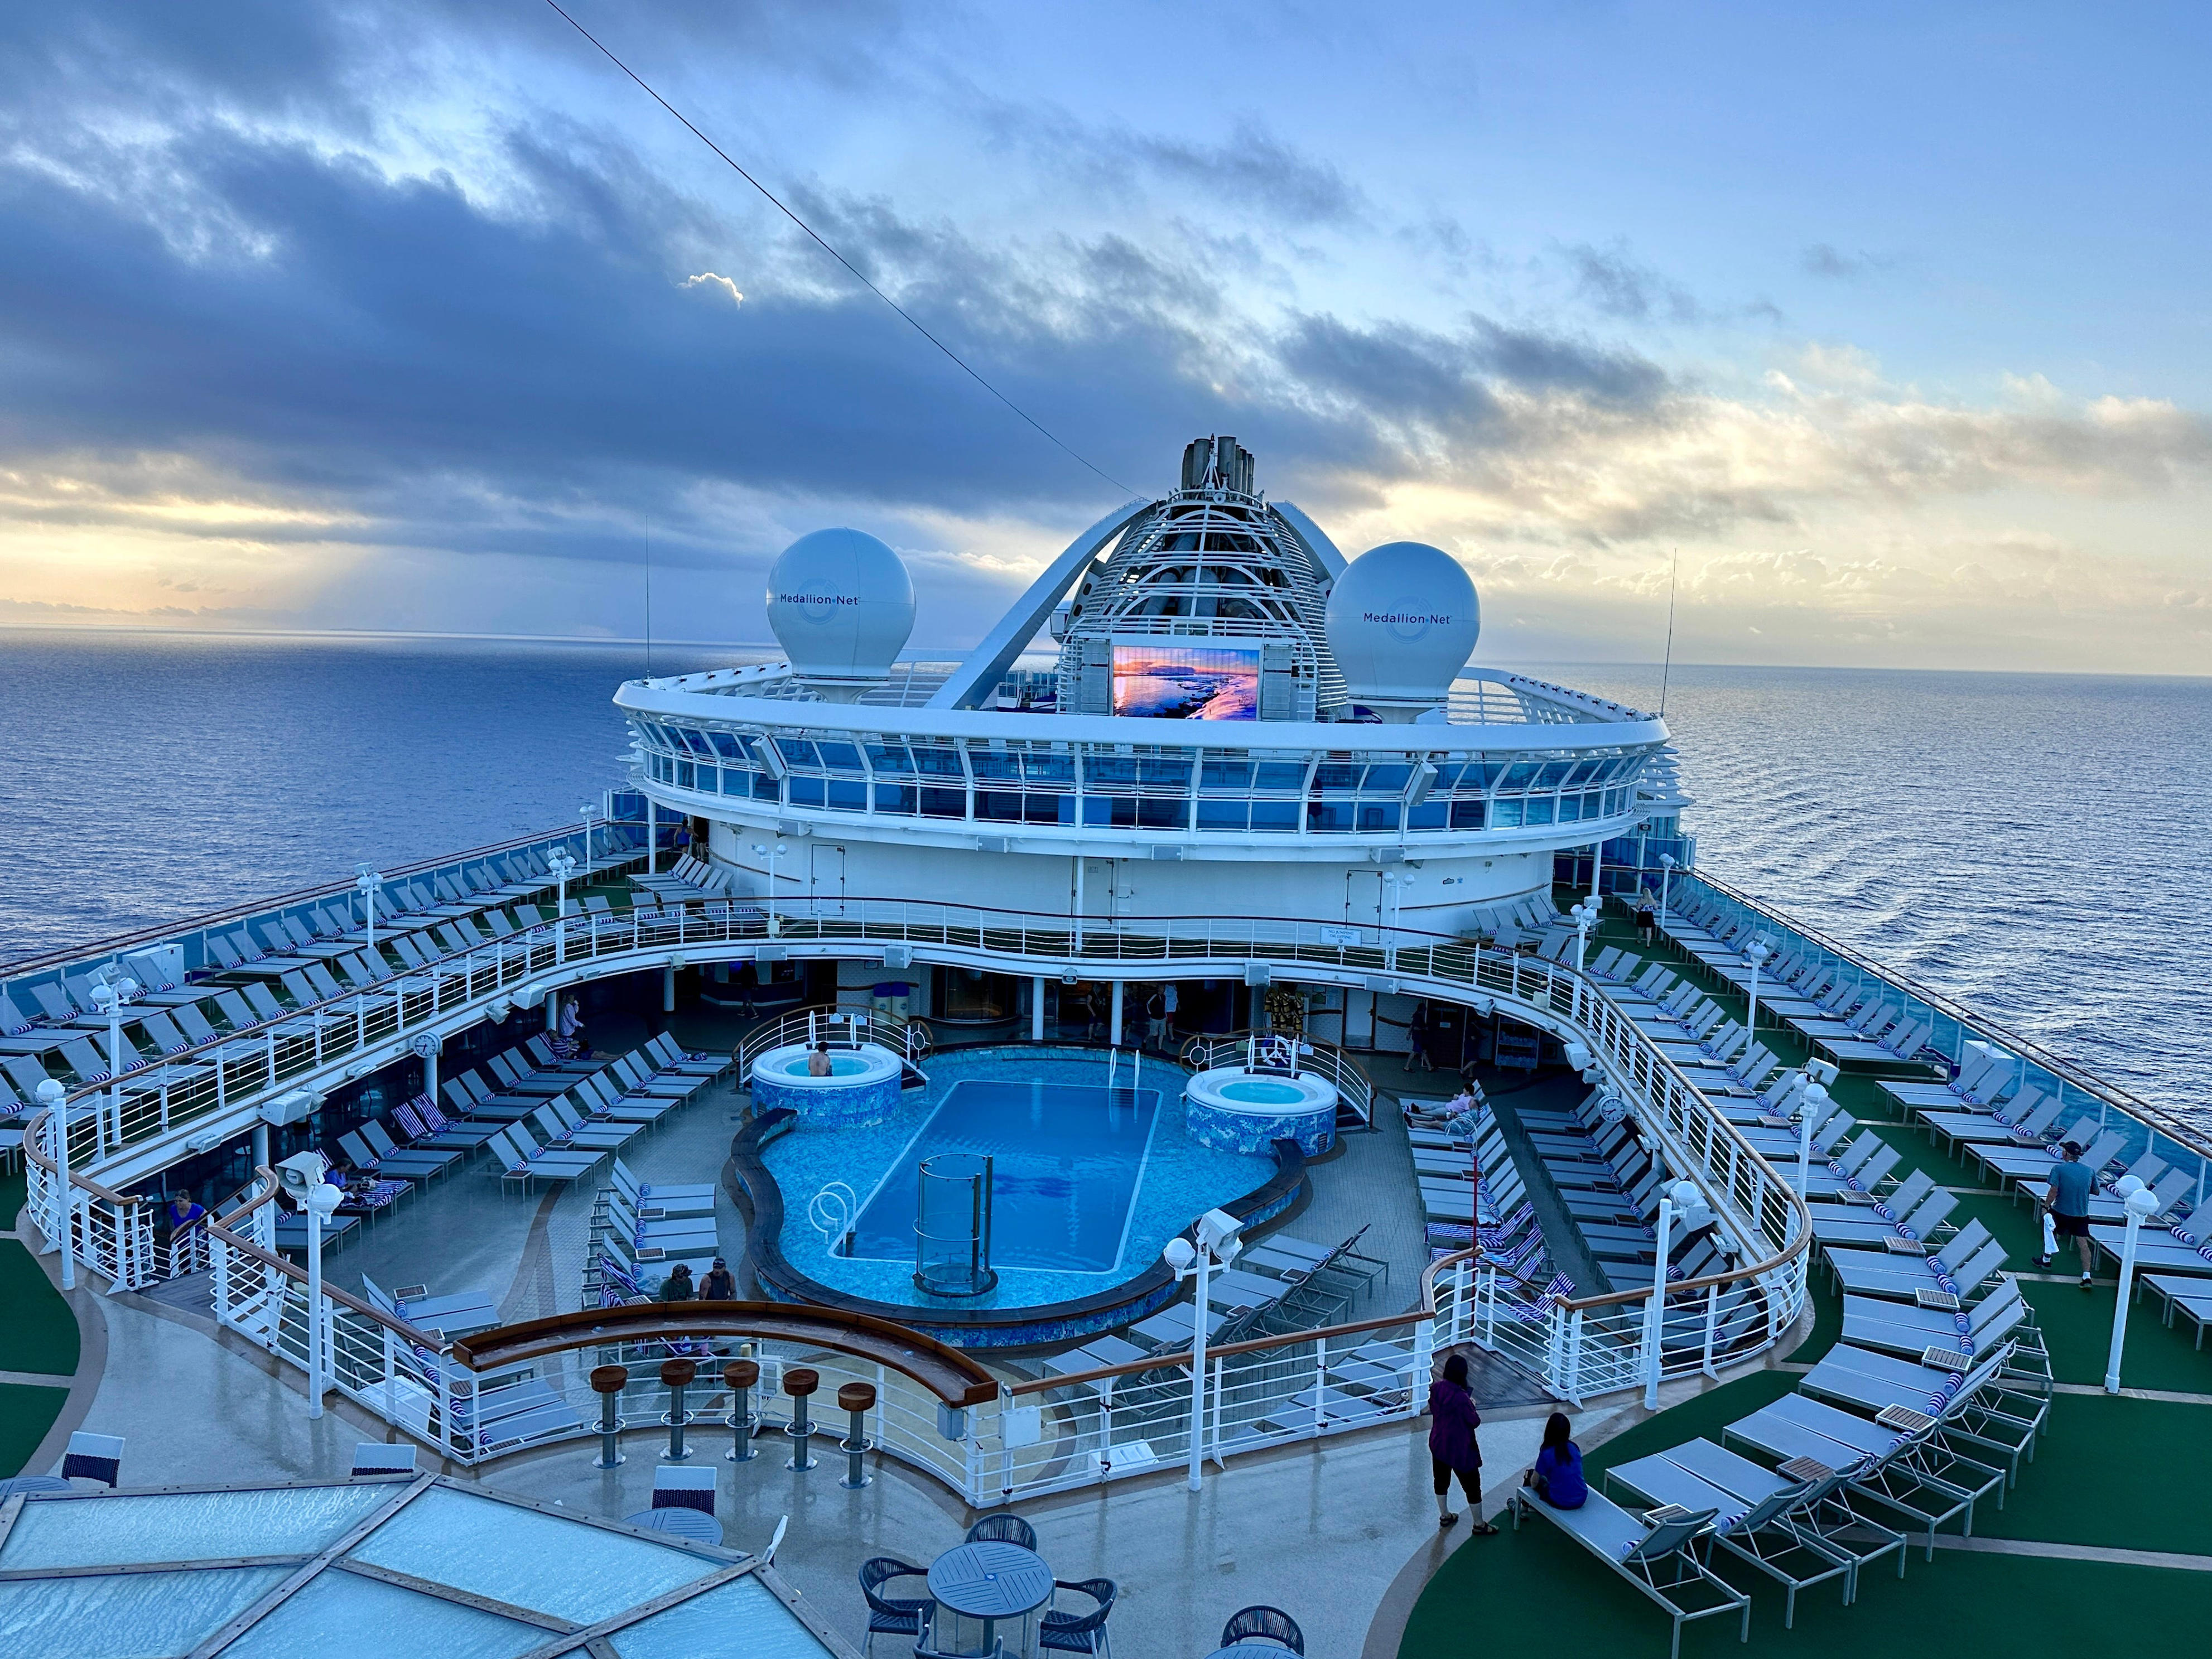 <p>I've found the two times when a ship's decks are virtually empty are early in the morning and late in the evening.</p><p>For most of the day, the busy main pool decks of the Caribbean Princess were full of revelers enjoying the spring-break sunshine, but in the morning and evening, things were much quieter.</p><p>Not having to fight the crowds to get a chair on the pool deck makes for a relaxing time of watching the ocean or reading a book quietly.</p>